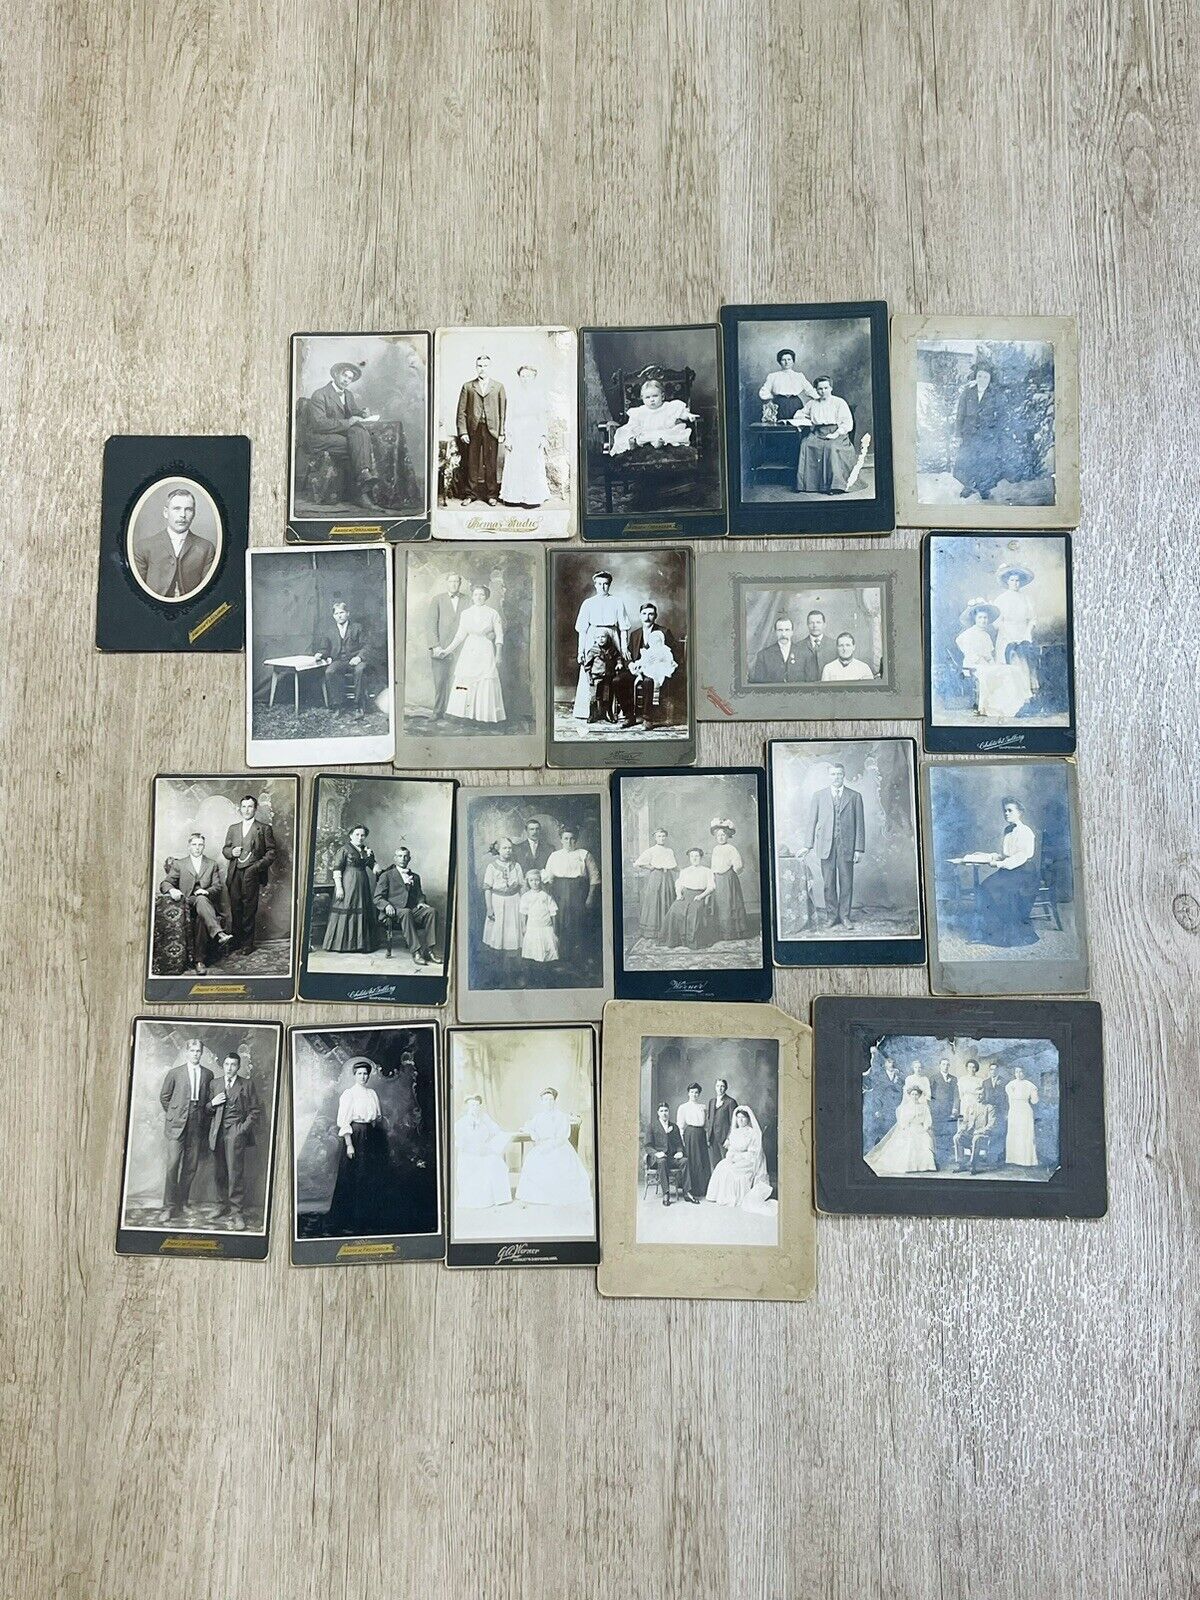 22 Cabinet Cards 1800's 1900s Some Marked Marquette Negaunee Ishpeming Michigan